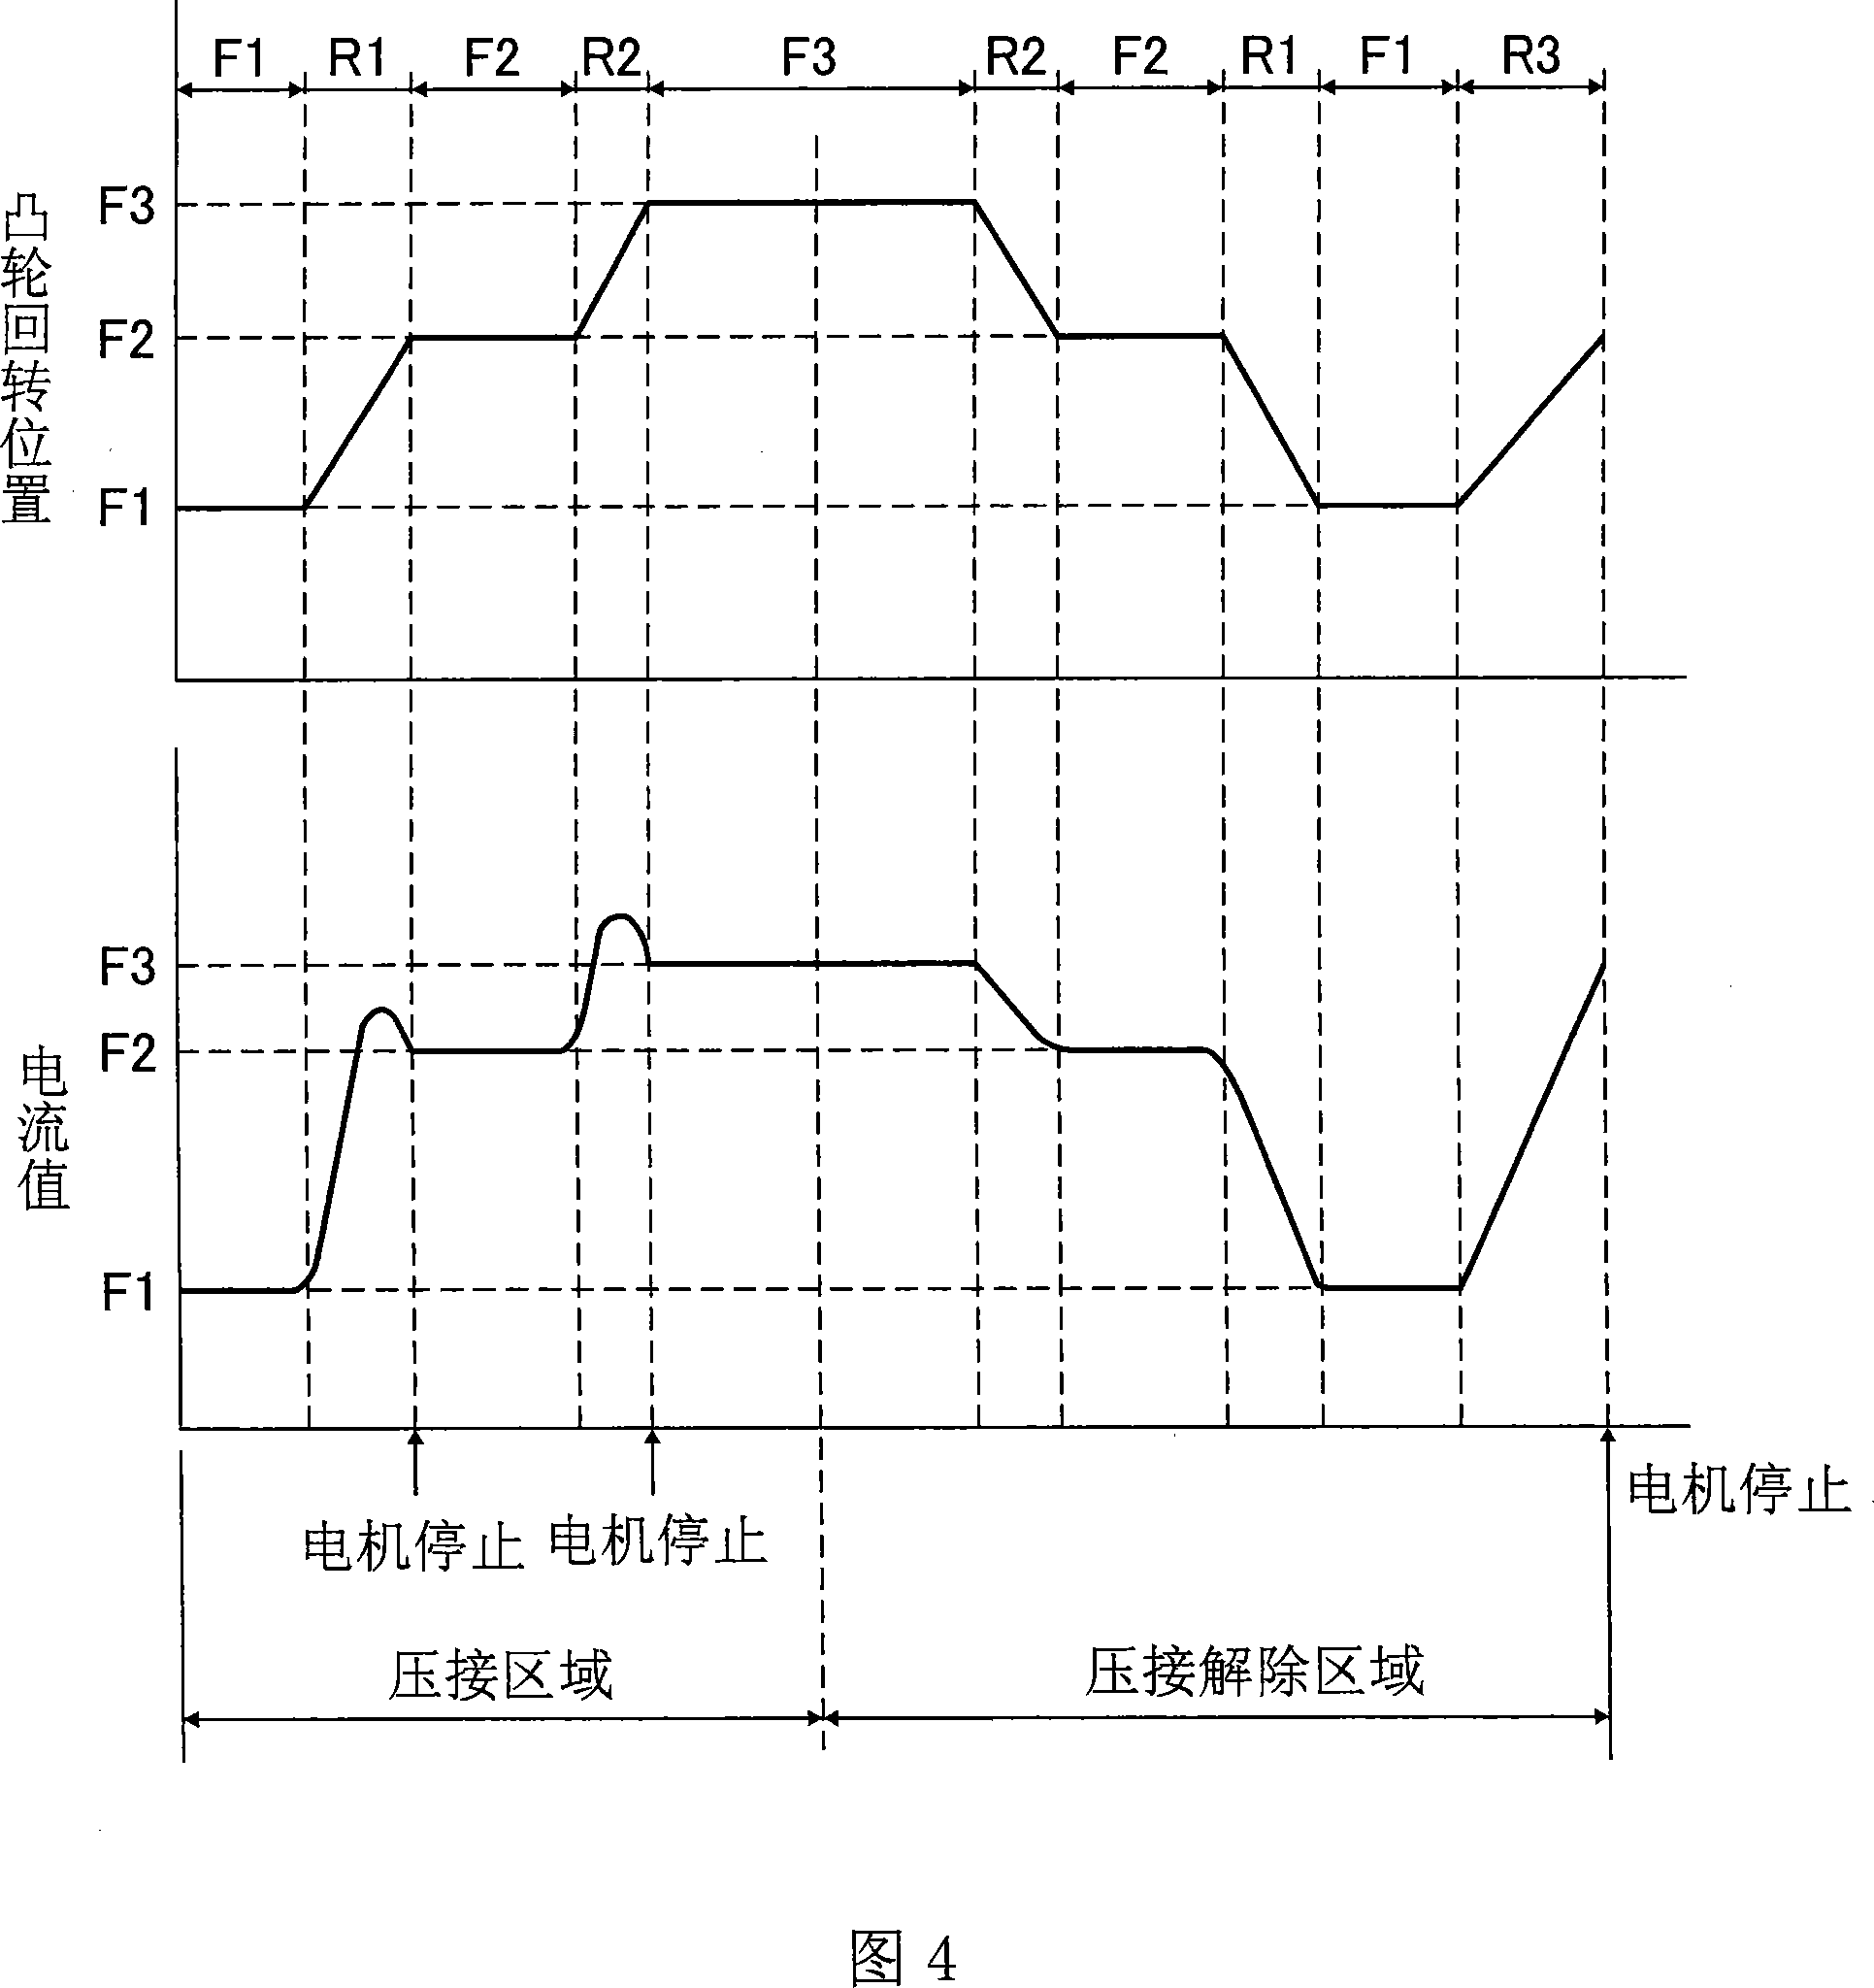 Fixer, image forming apparatus, and image forming method